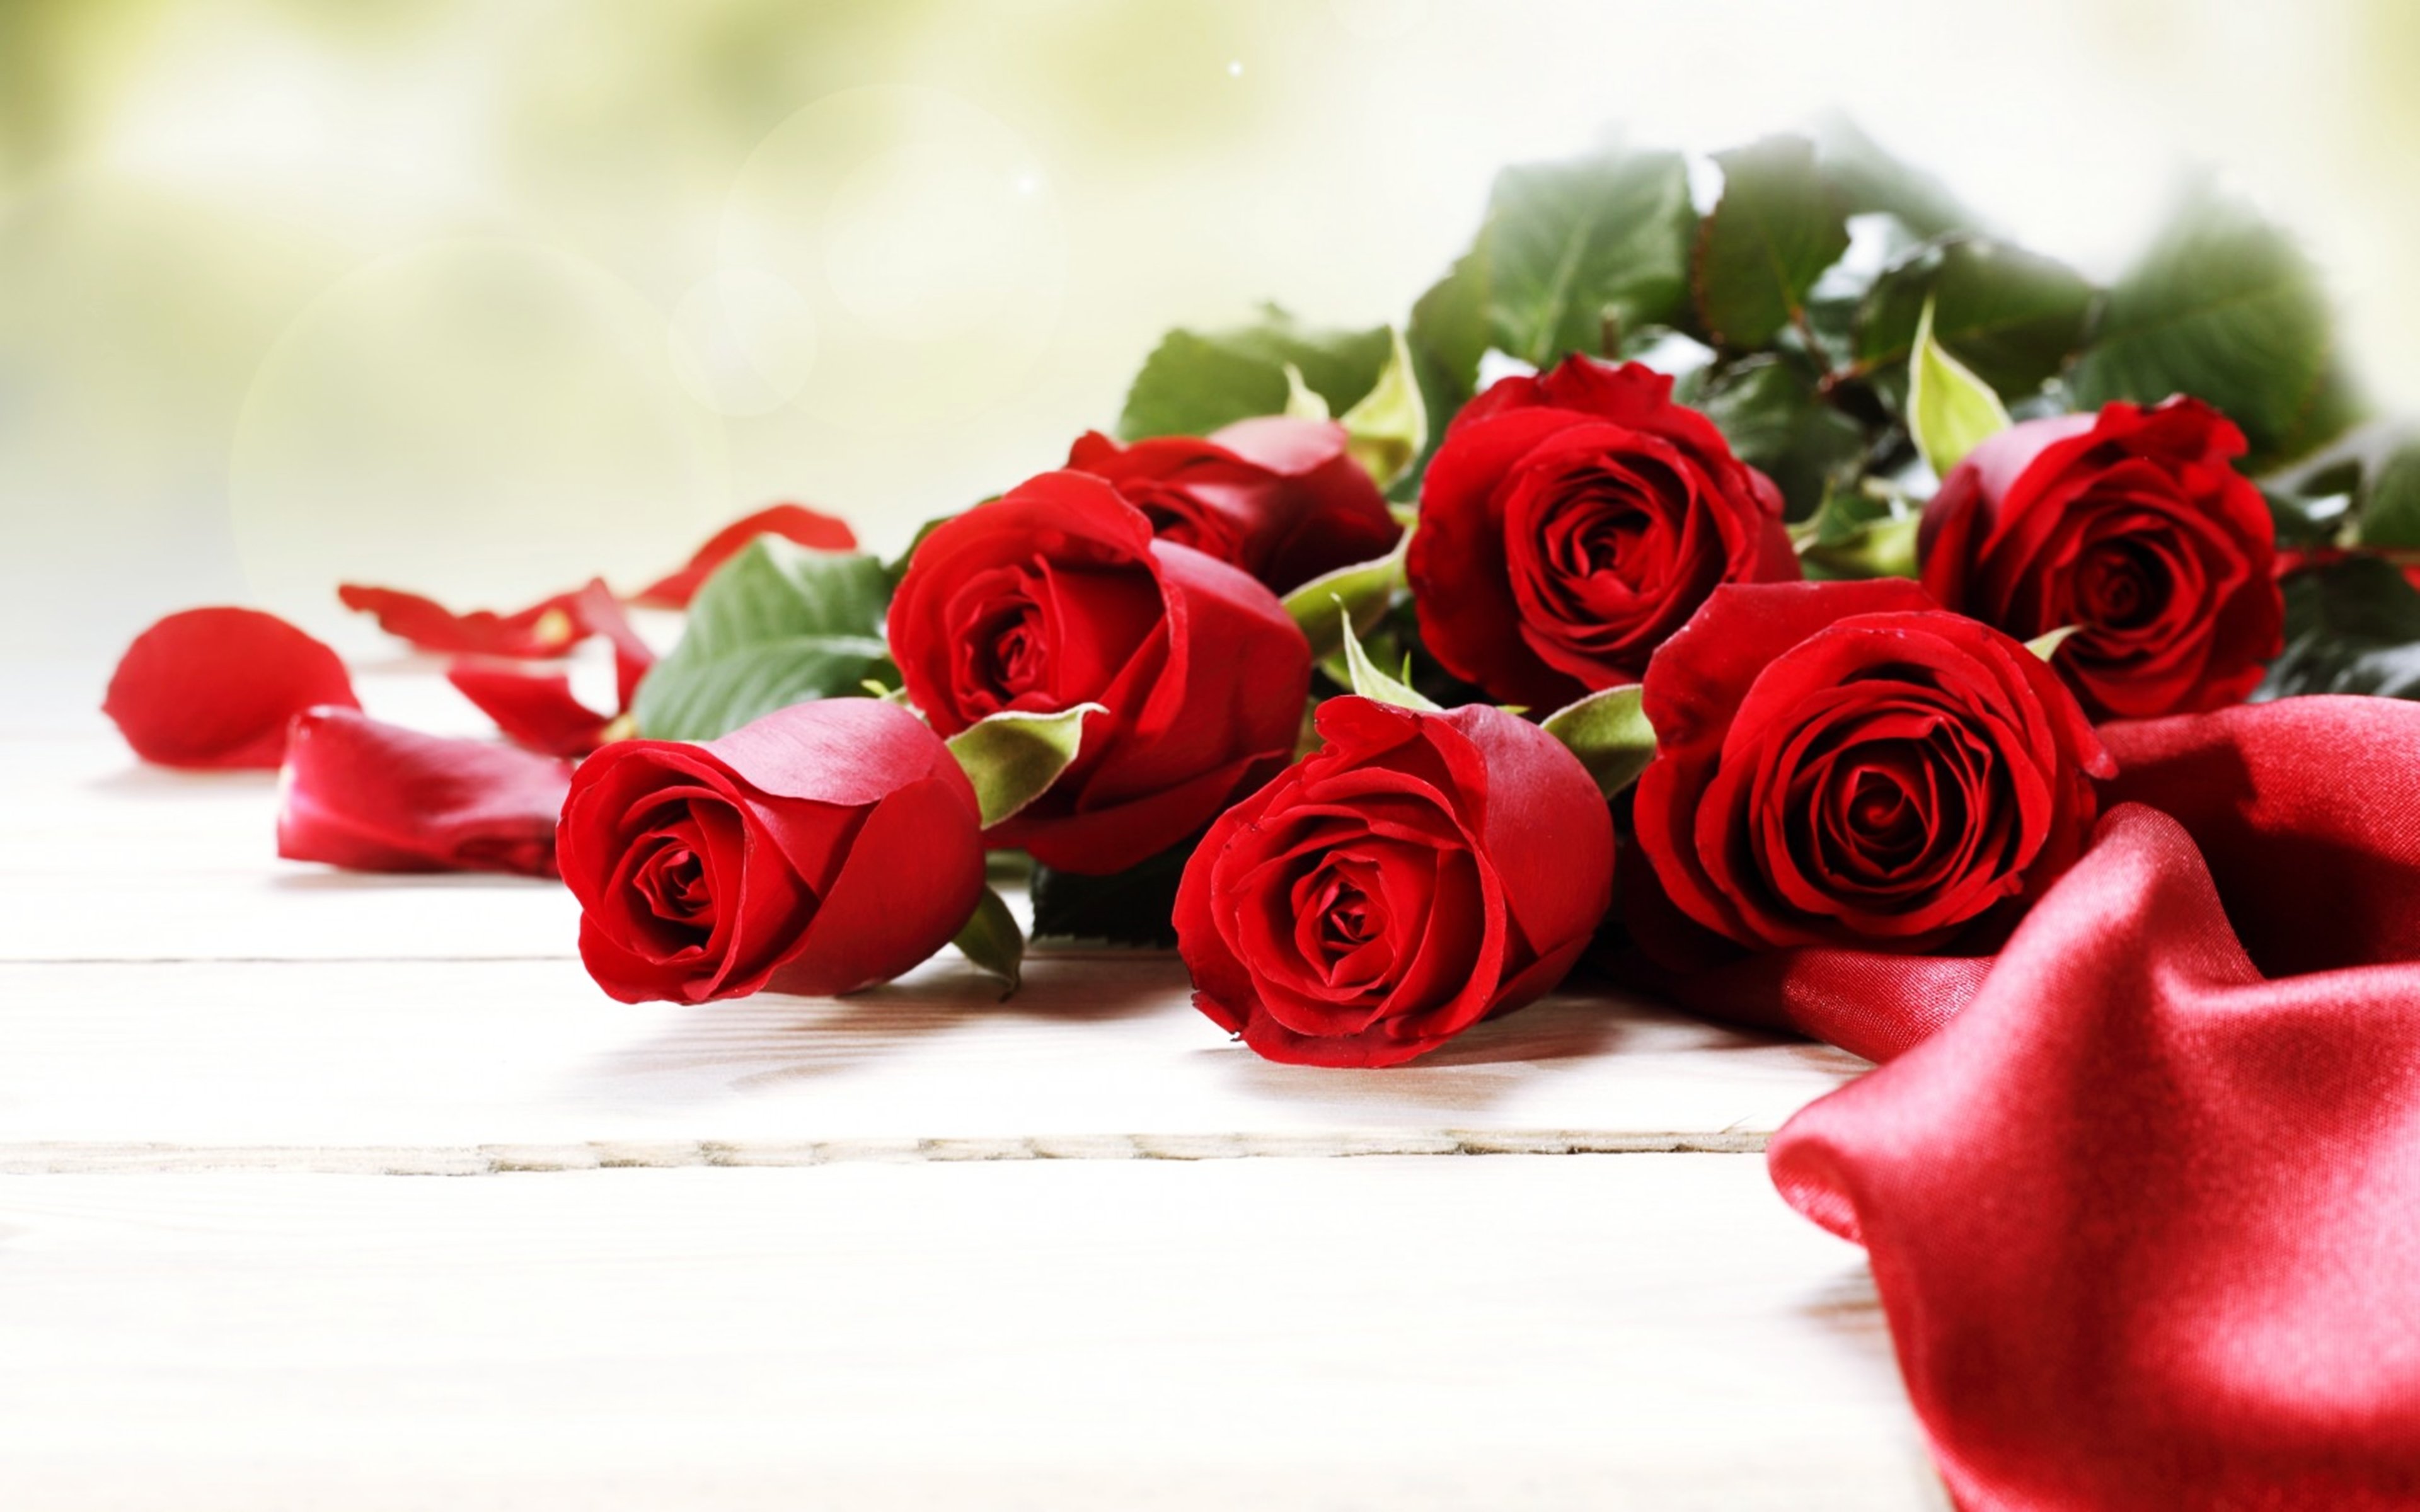 roses, Red, Flowers, Love, Romance, Emotions, 4you, Bouquet, Spring ...